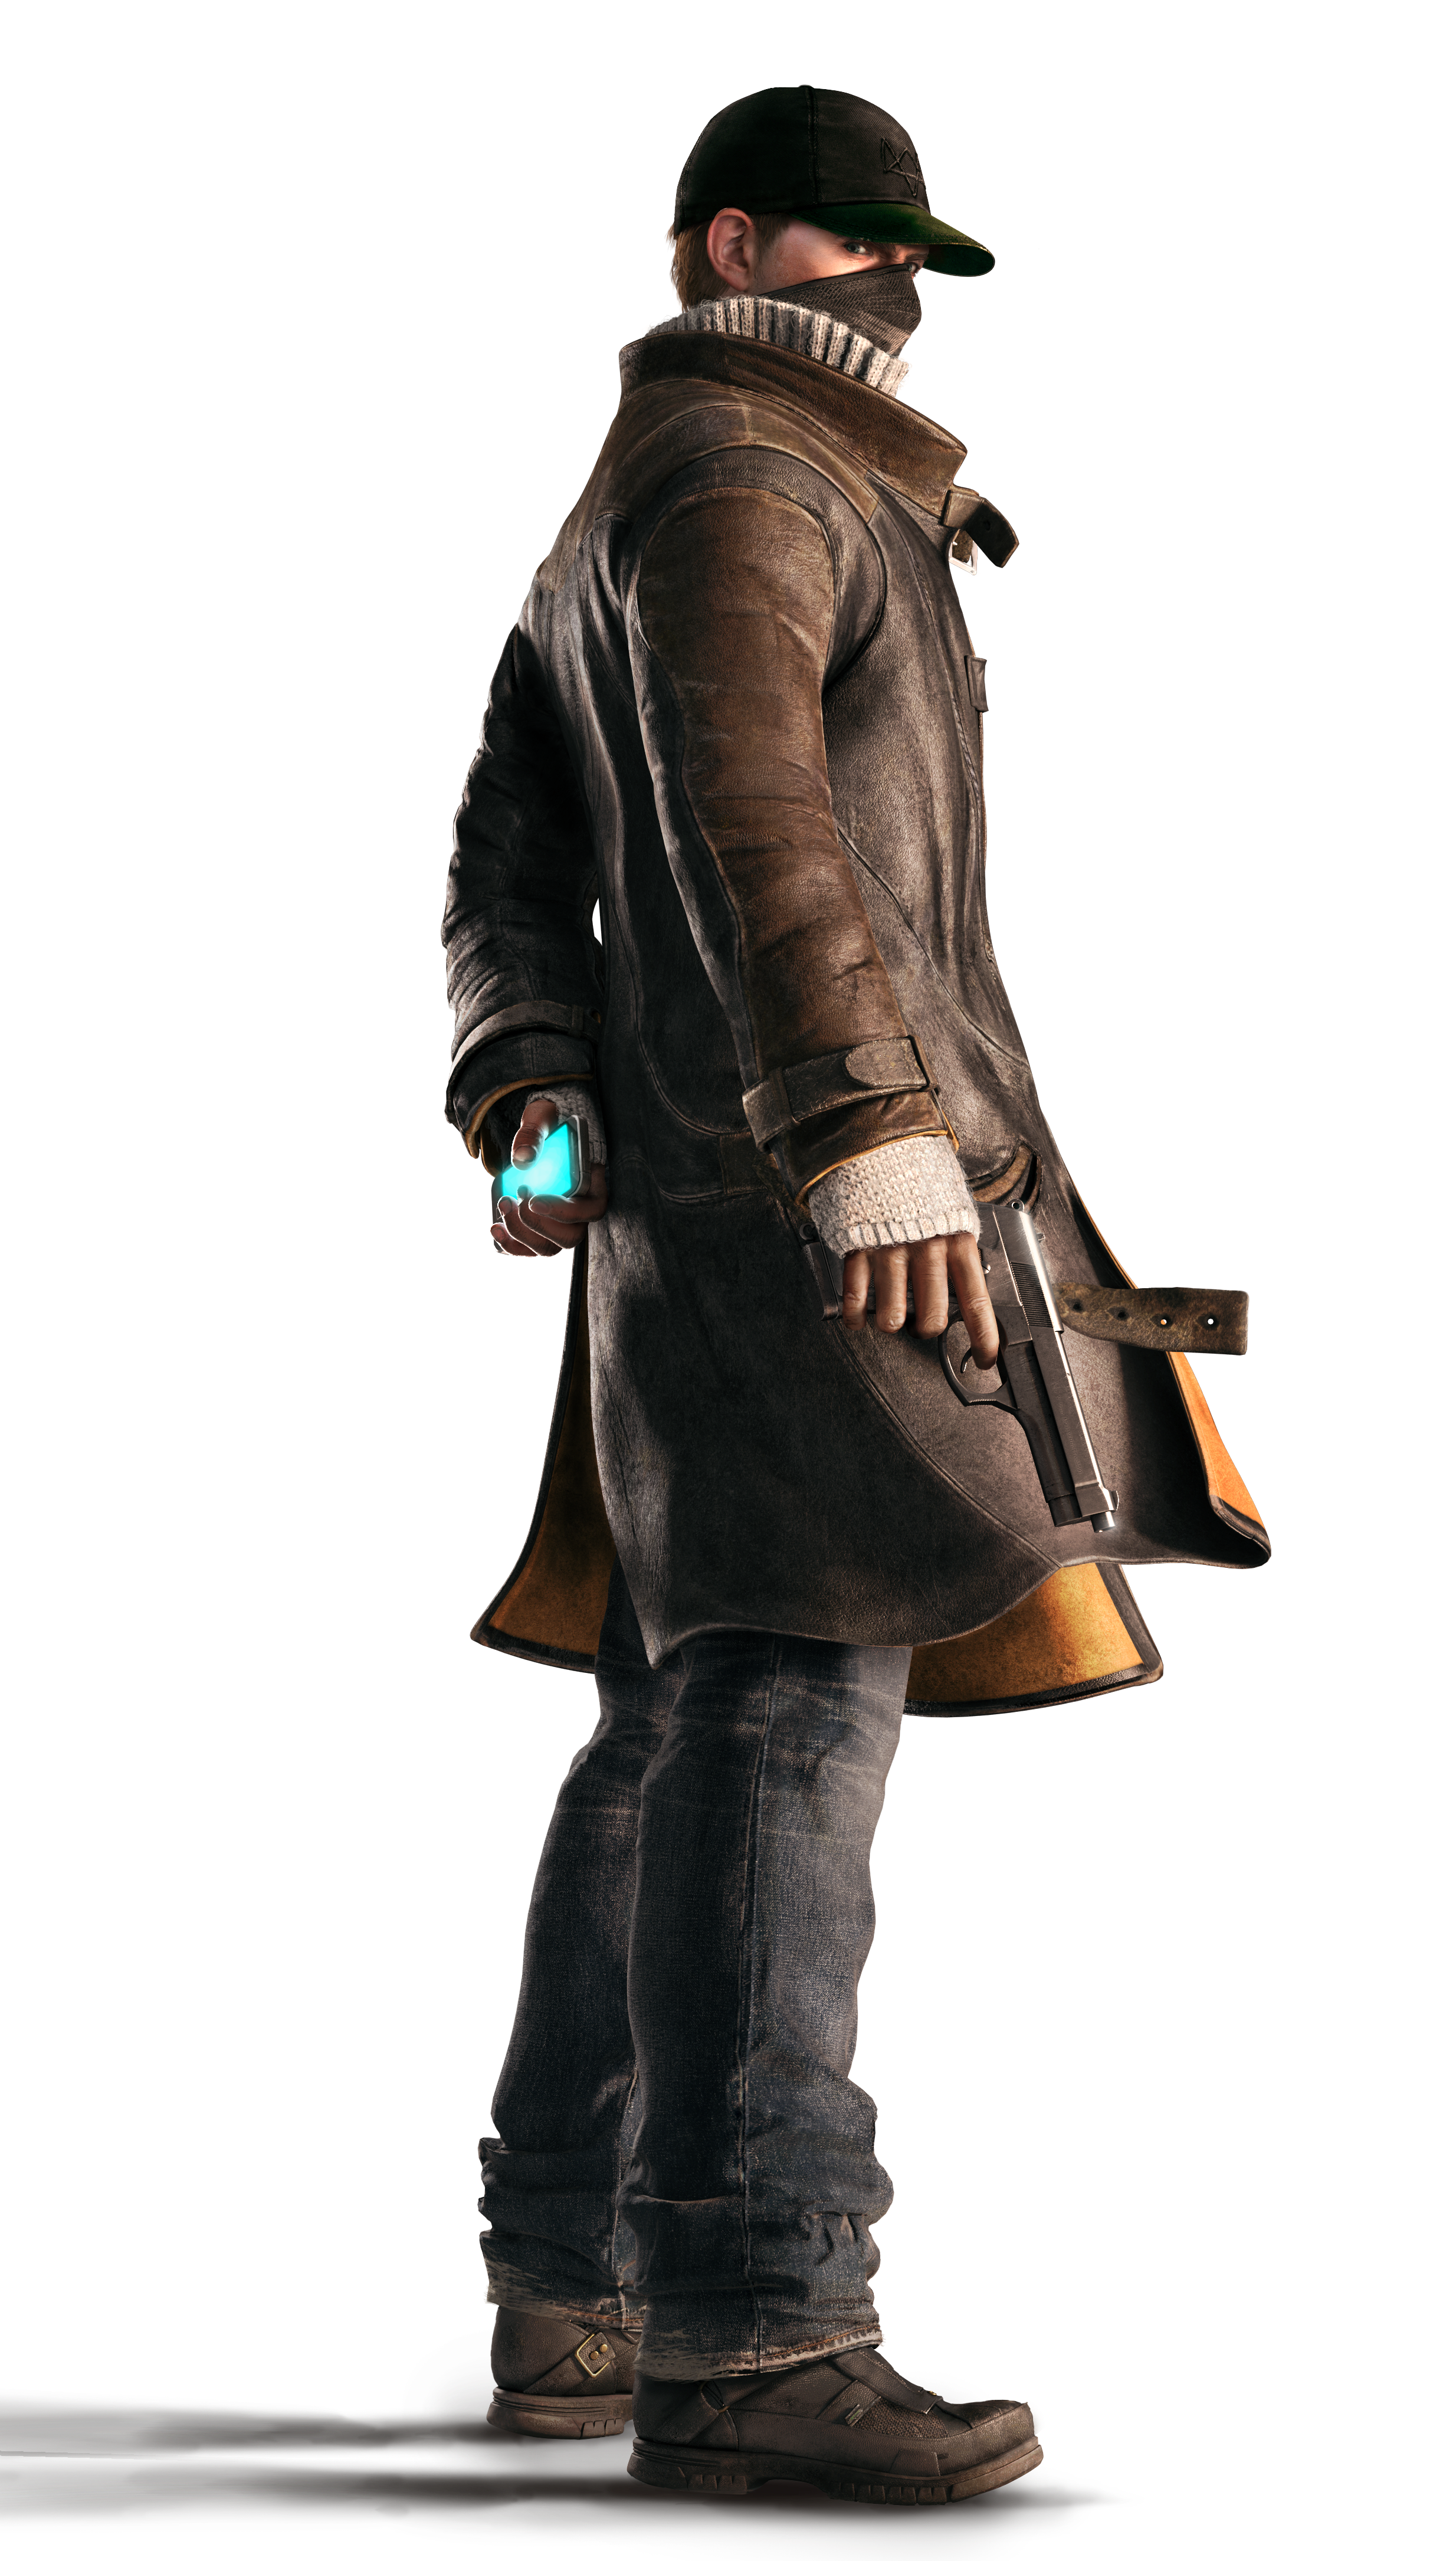 Wrench WD2 Render.png.png